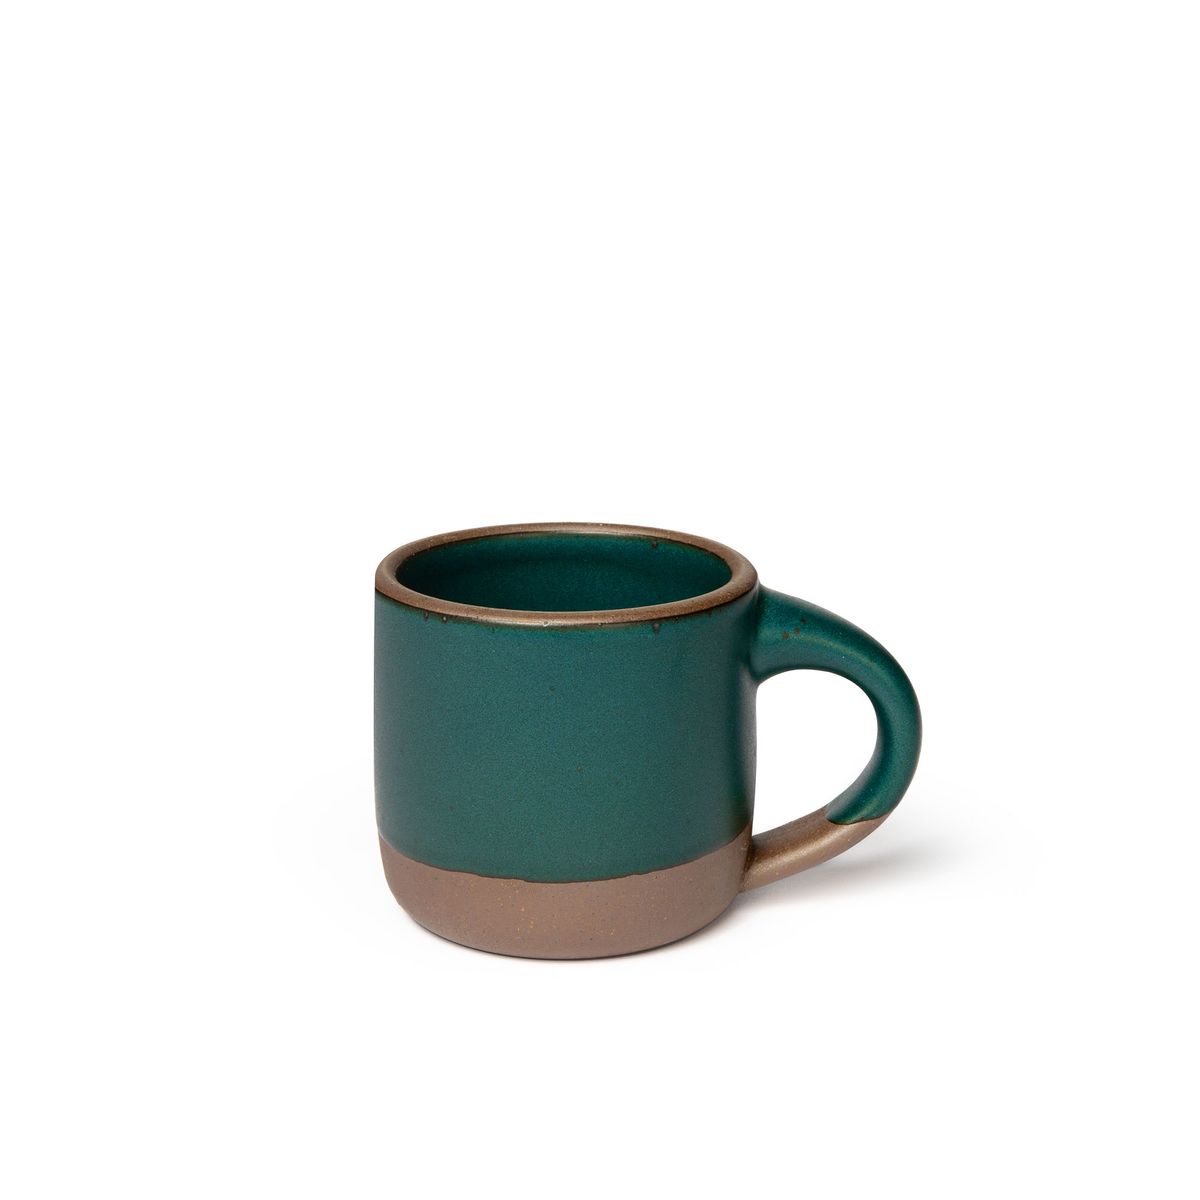 A small sized ceramic mug with handle in a deep dark teal glaze featuring iron speckles and unglazed rim and bottom base.